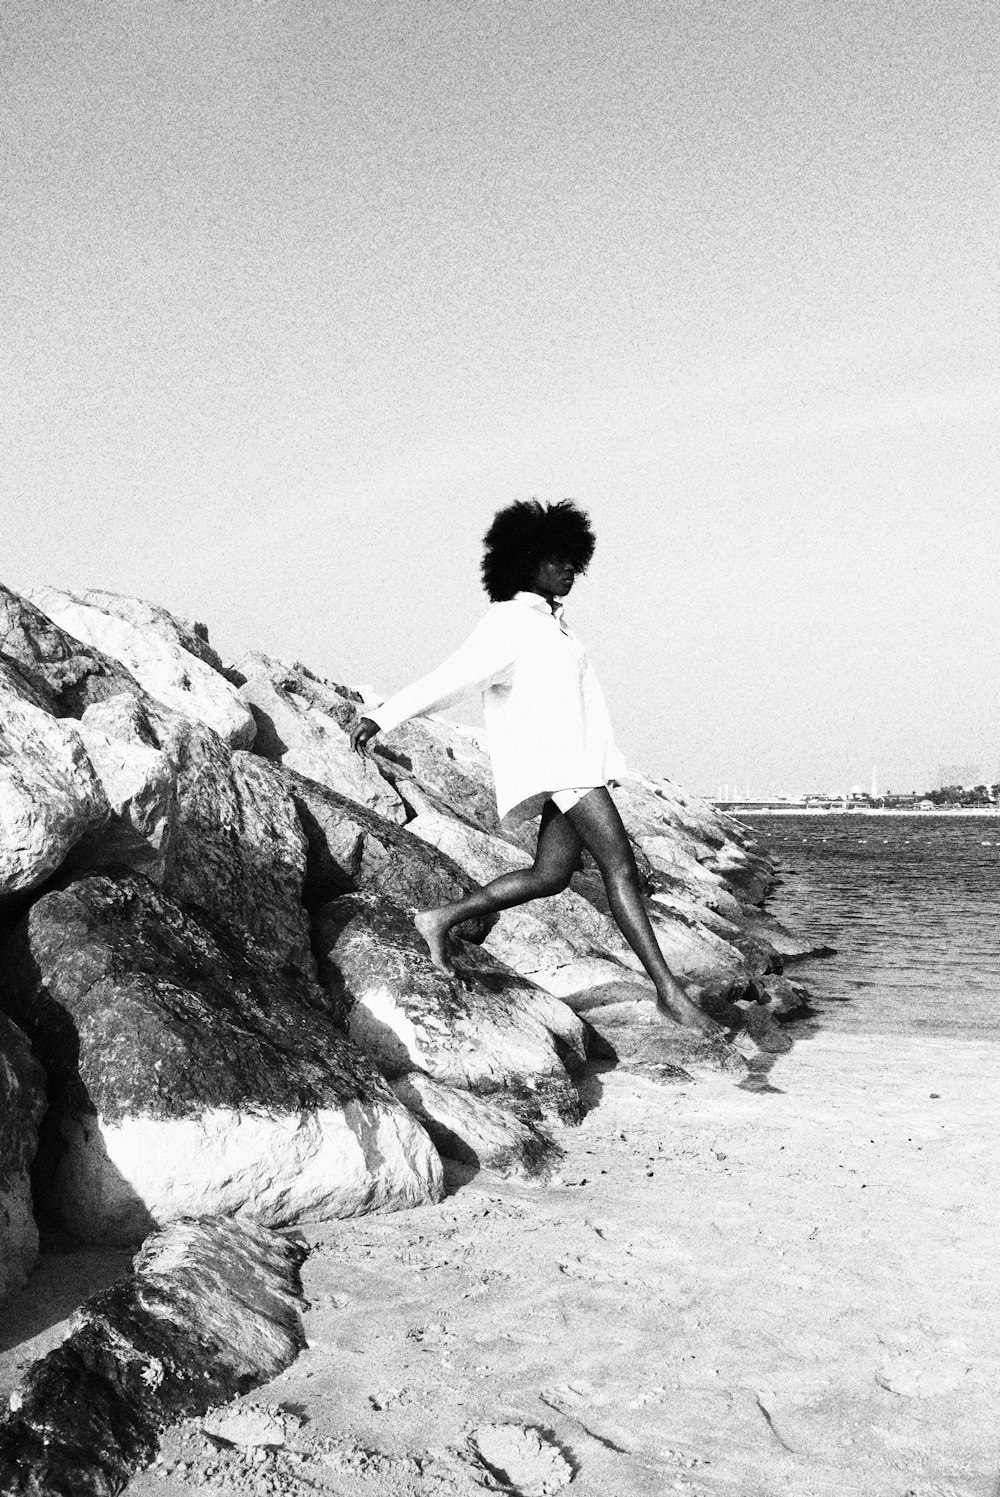 a woman jumping off a rock into the water